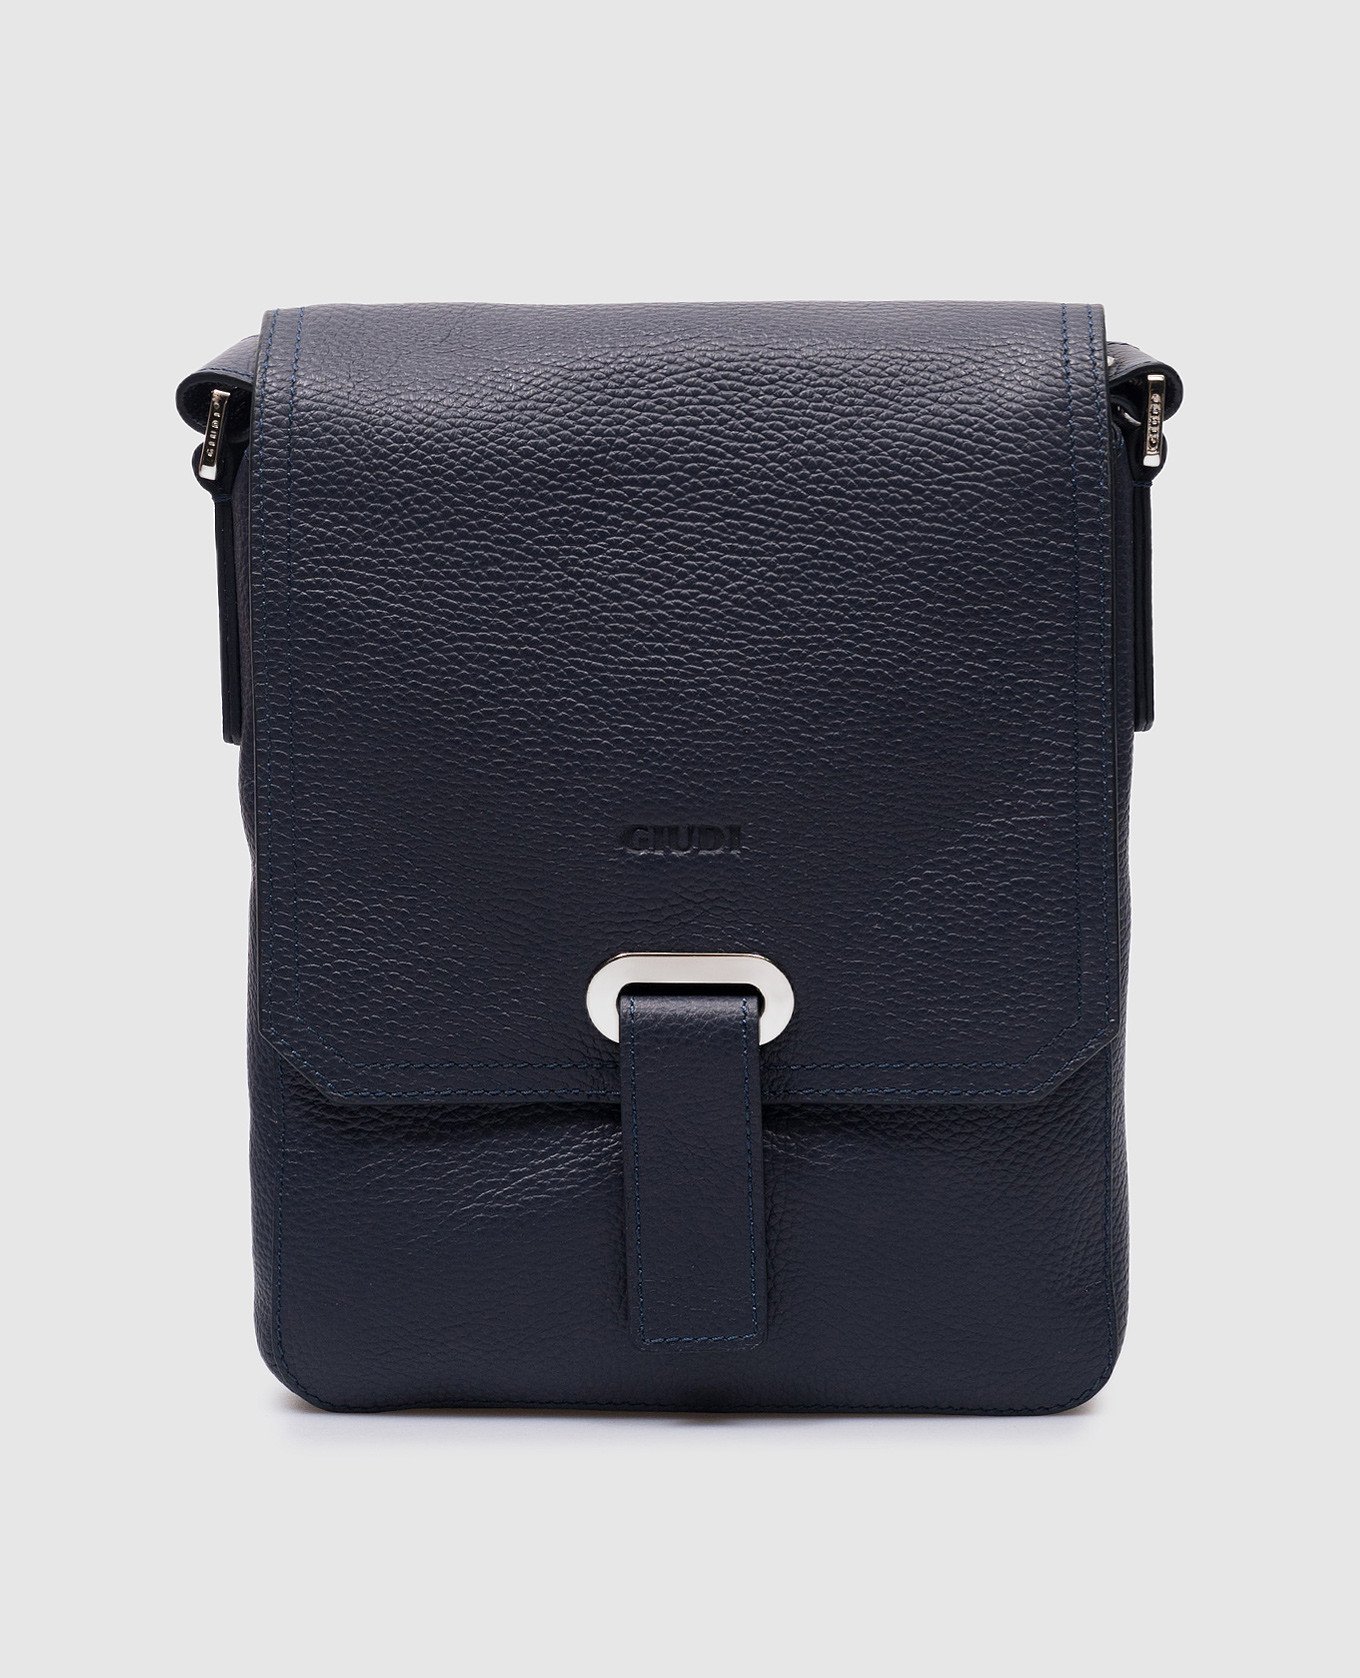 Blue leather messenger bag with embossed logo